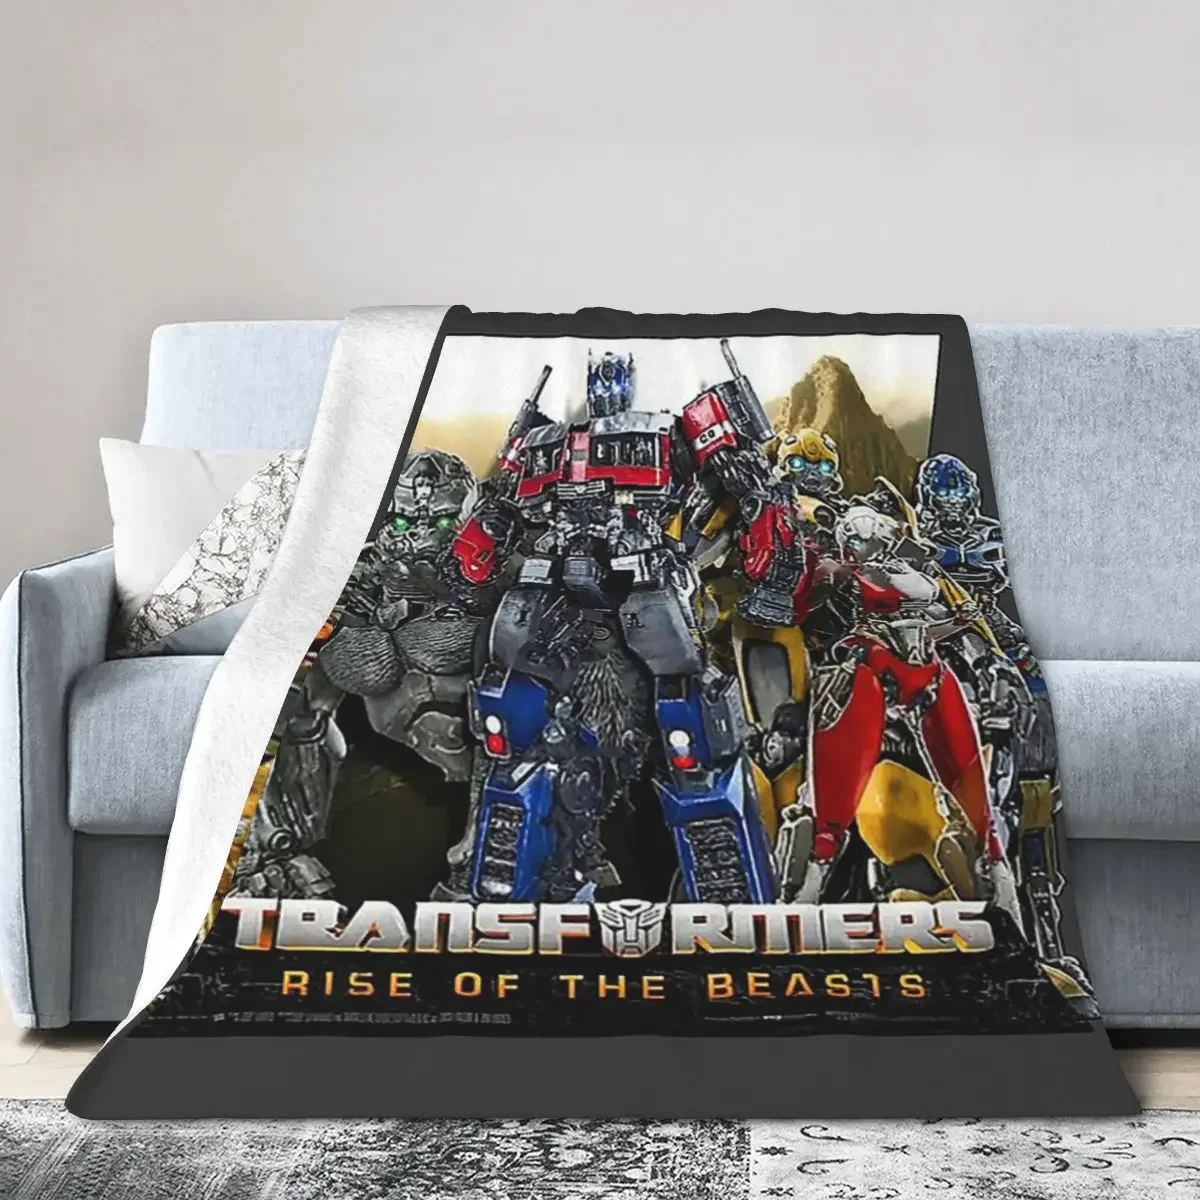 

Transformers Rise Of The Beasts Blankets Soft Warm Flannel Throw Blanket Bedspread for Bed Living room Picnic Travel Home Sofa